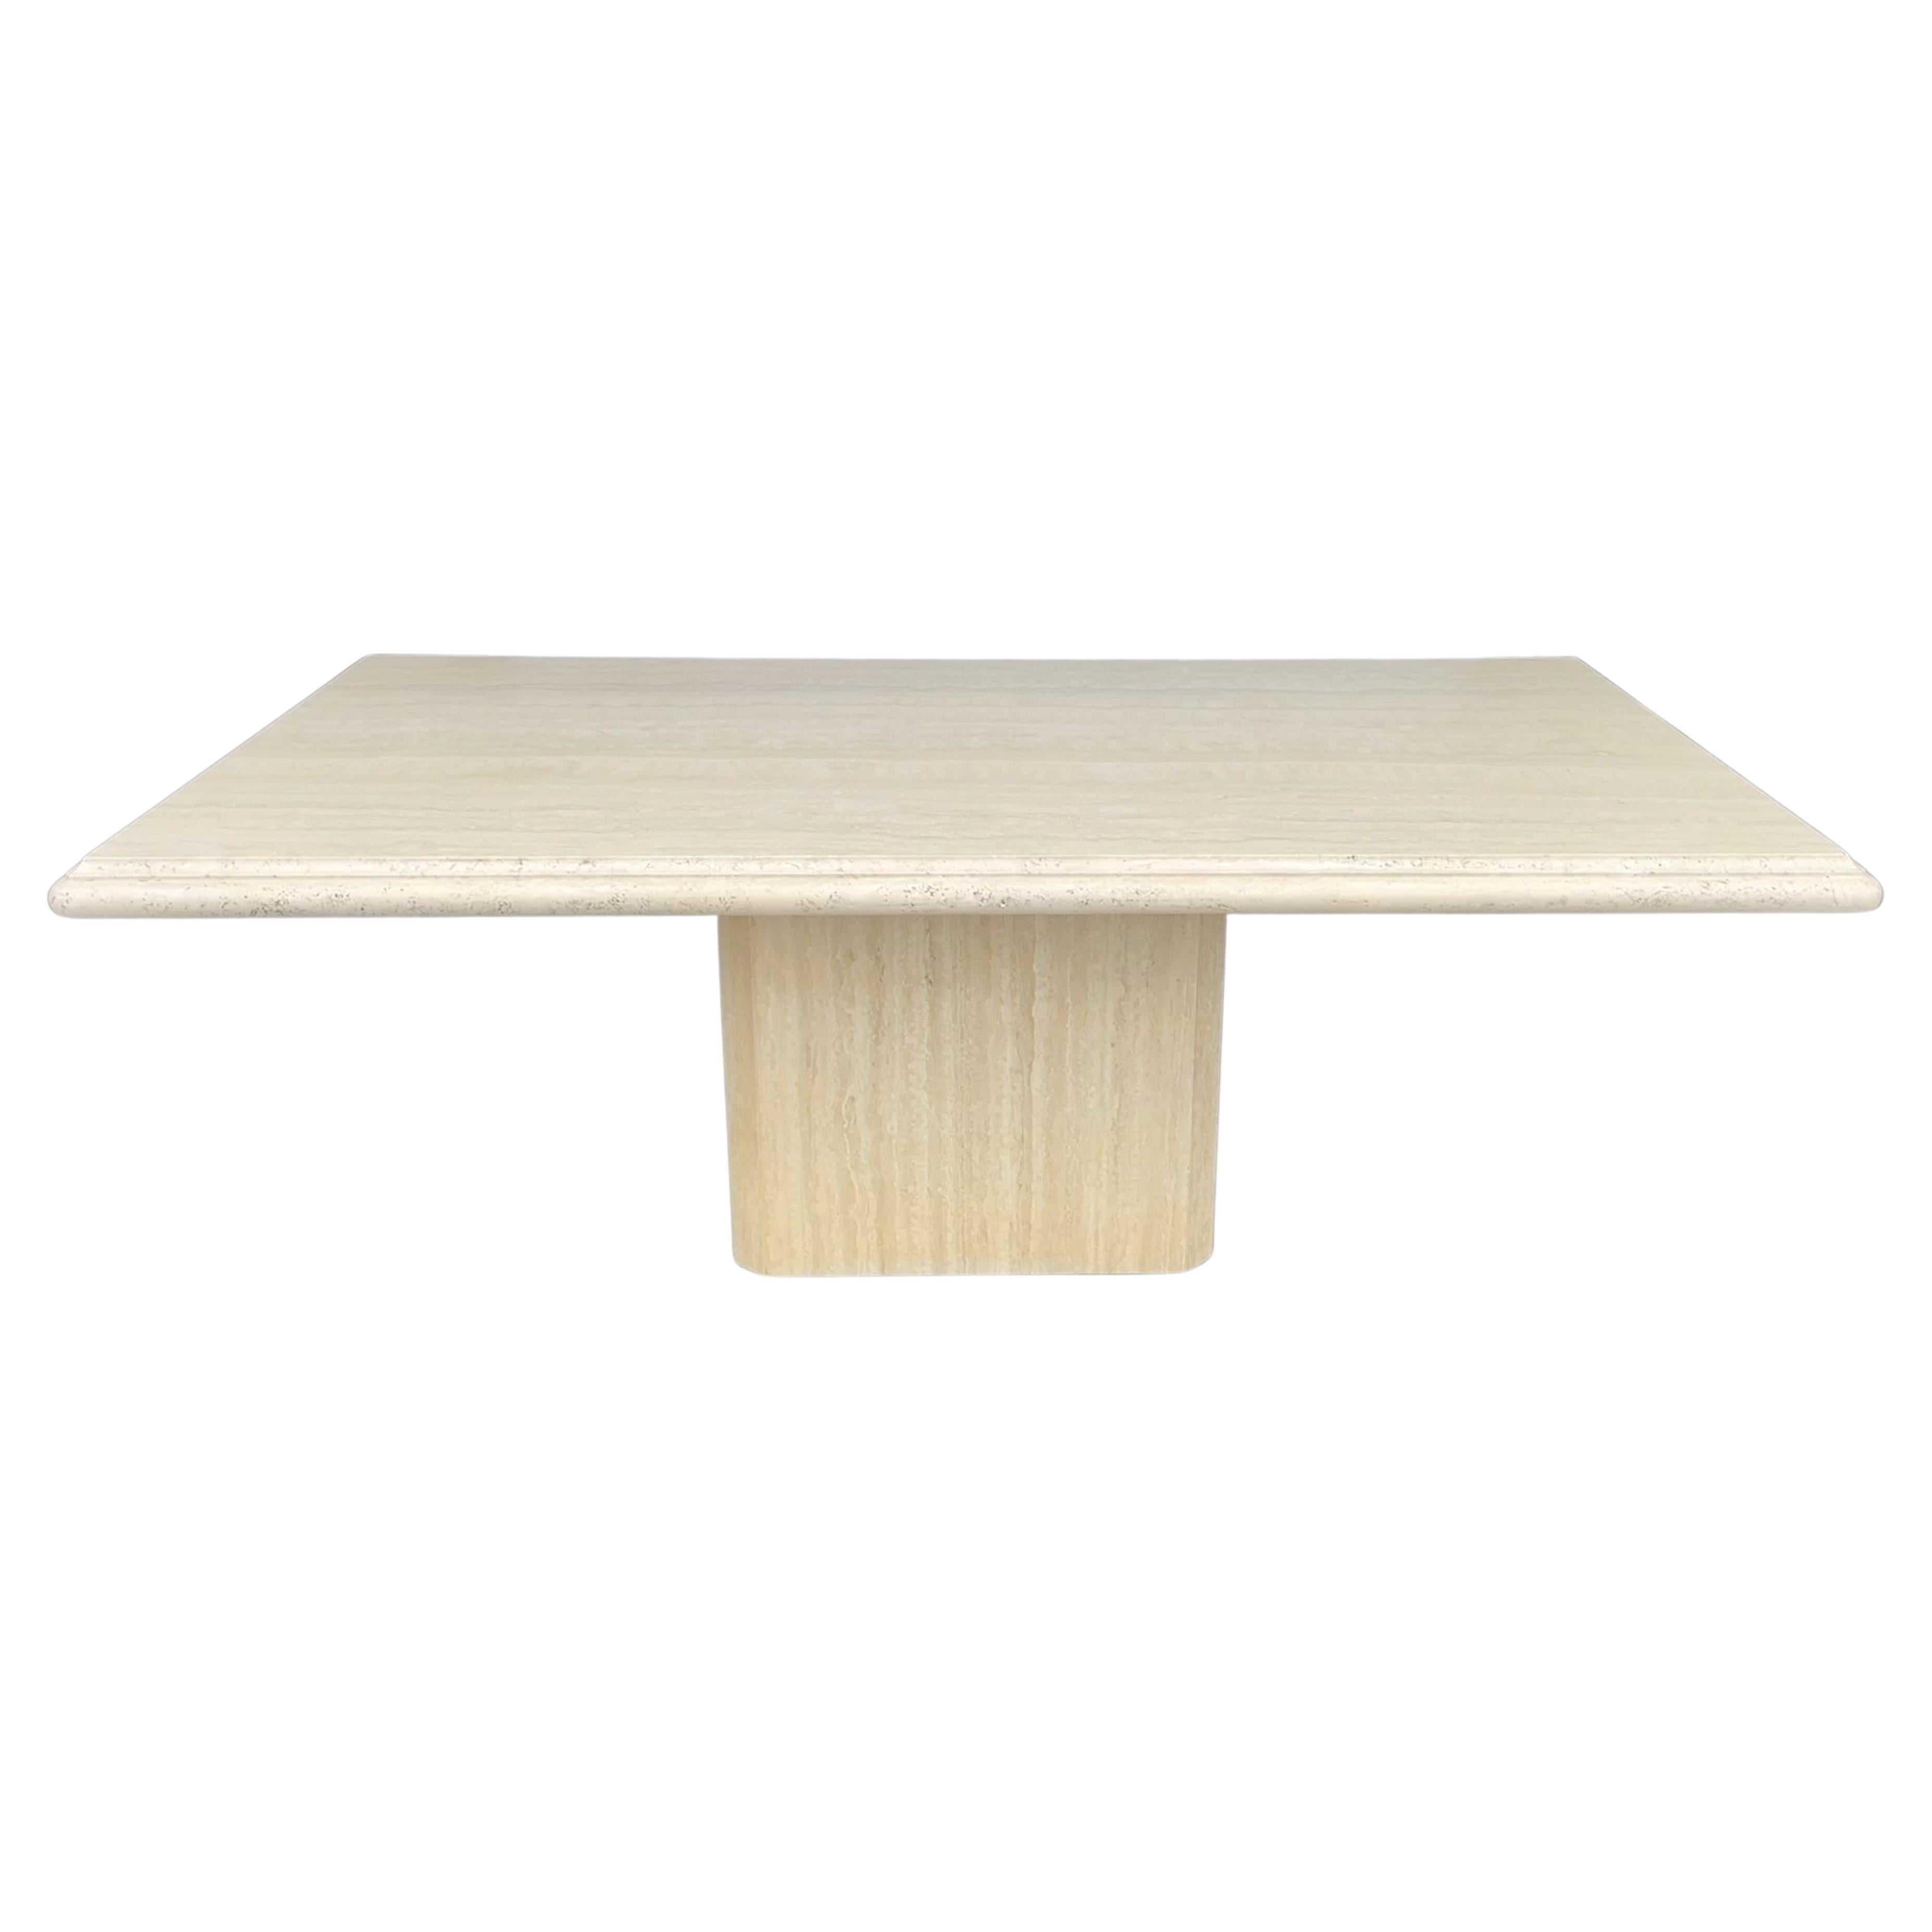 SATURDAY SALE

Travertine Dining Table by Lavorazione Artigiana Onice di Luciano Cionini & C. s.n.c. circa 1990's.
30 inches high by 79 inches long by 39.5 inches wide.
Molded beveled bullnose edge.
Monolithic pedestal.
Clean modern lines.